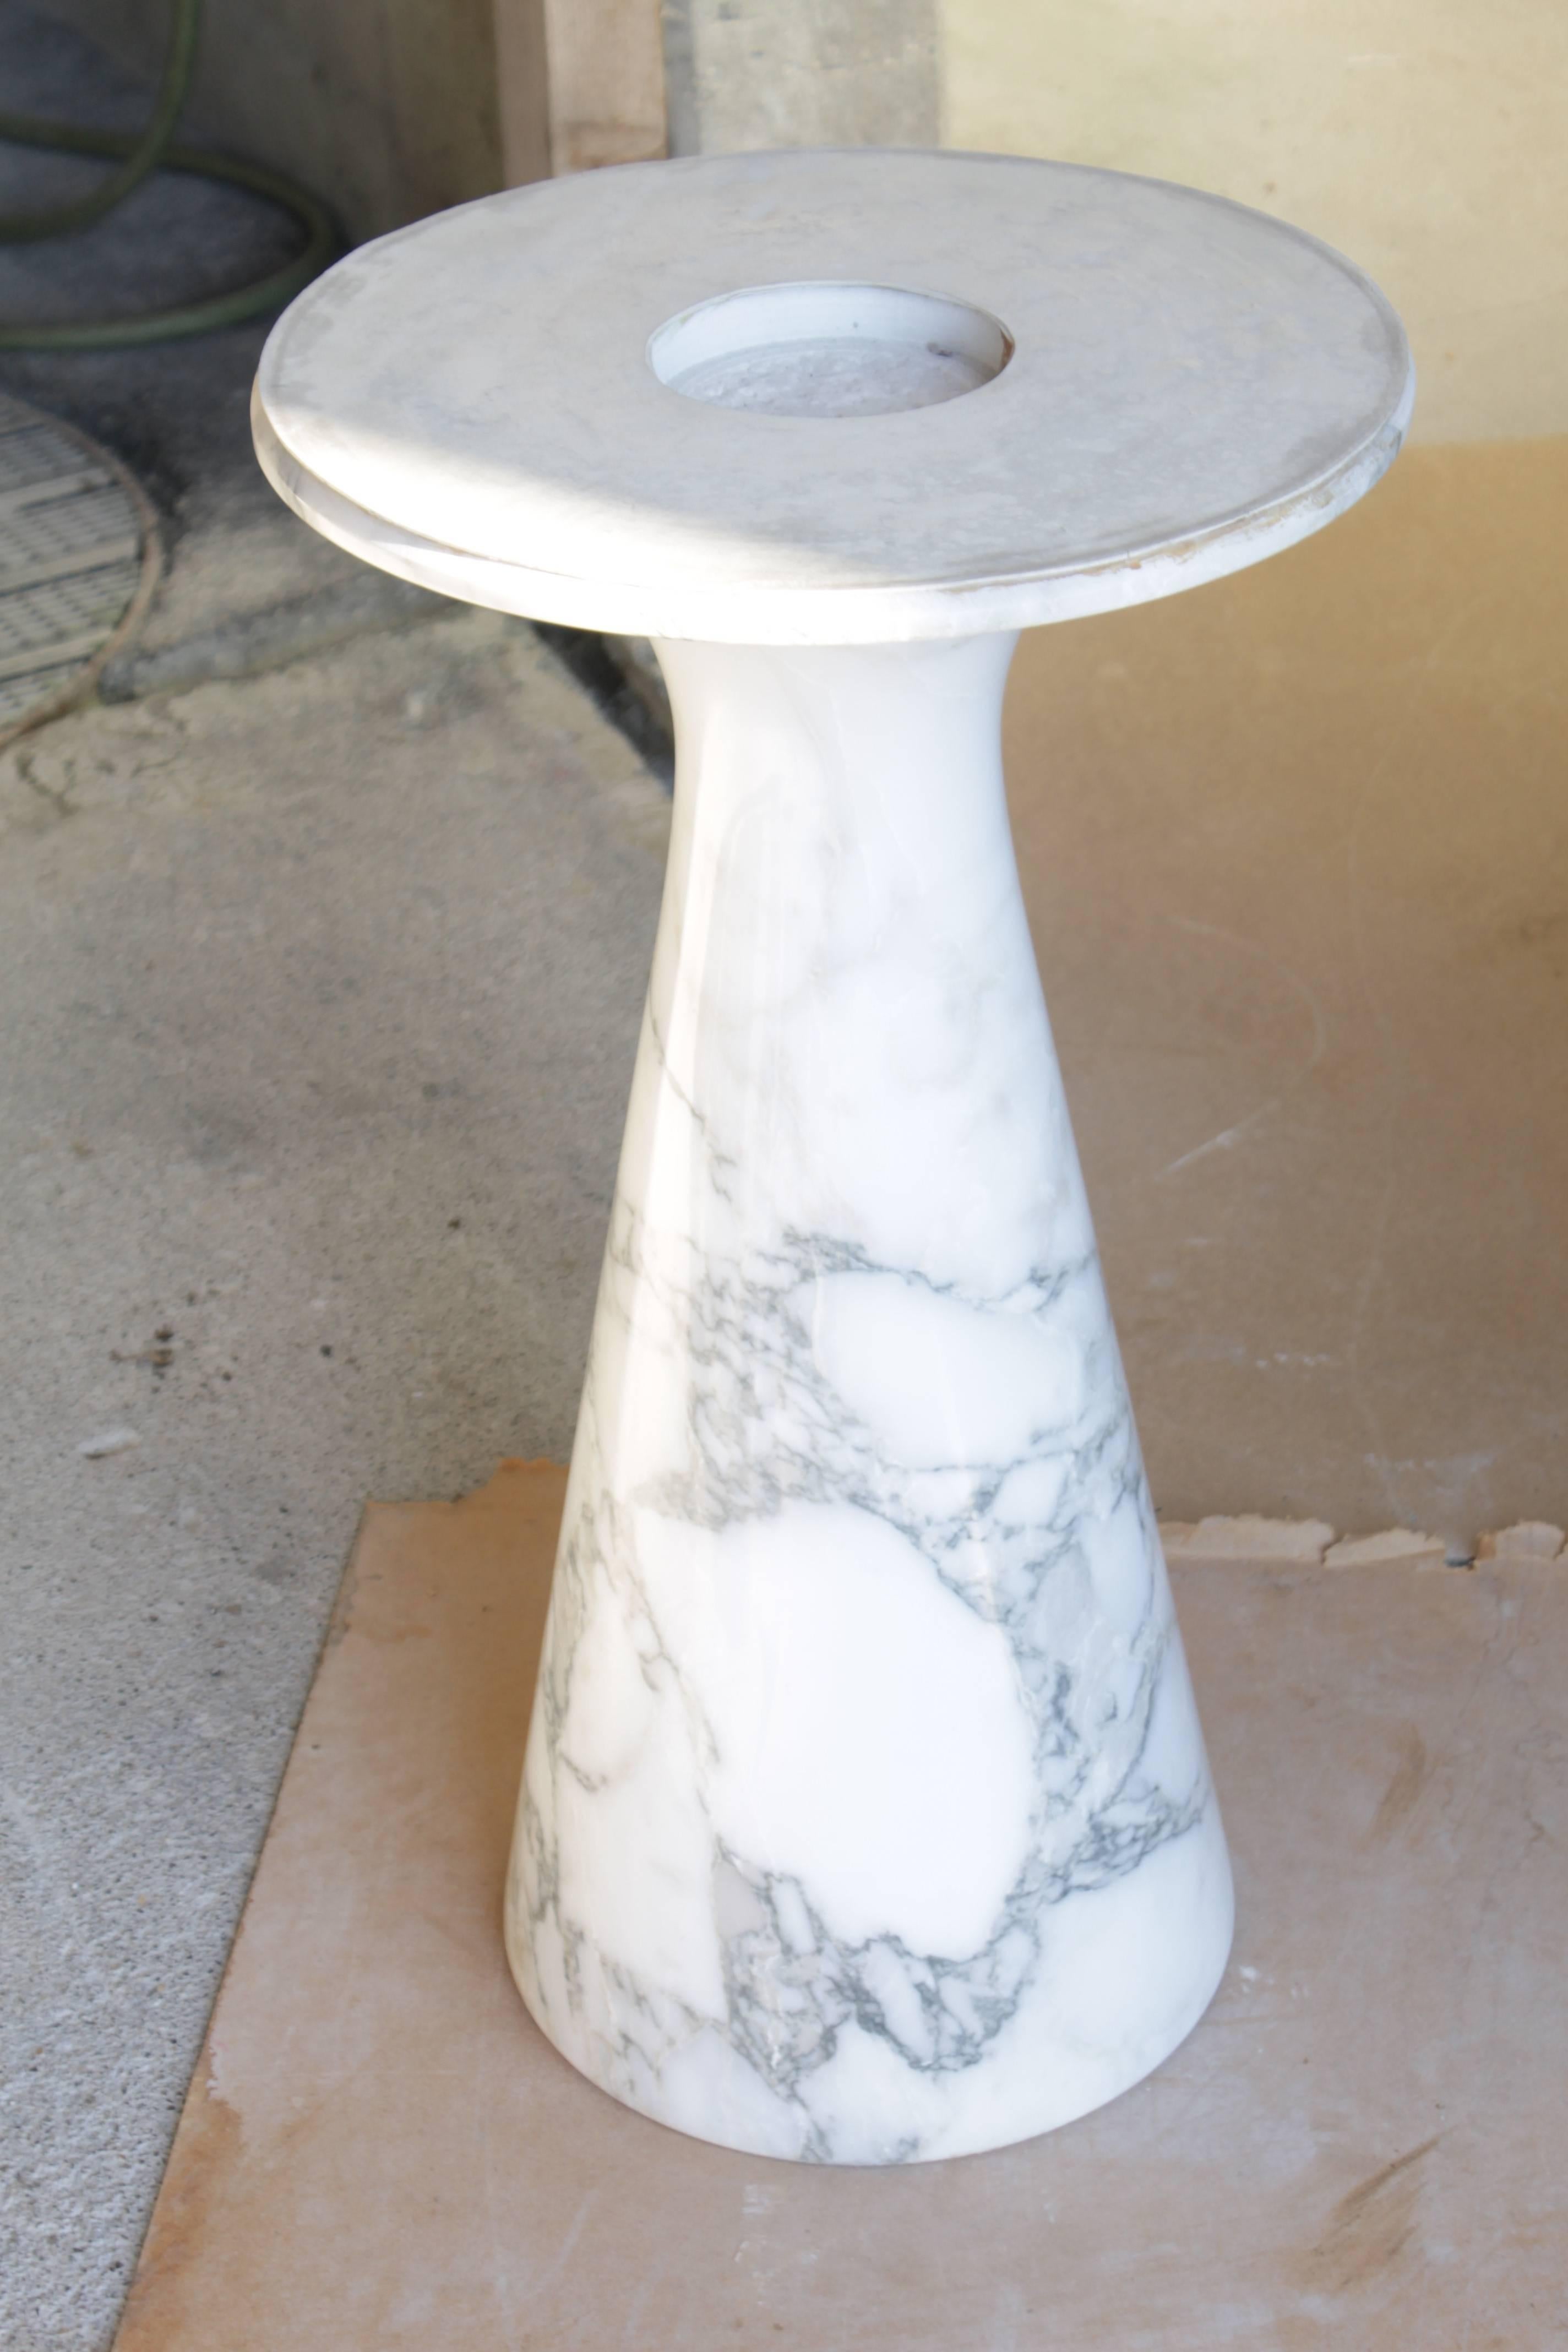 Arabescato marble dining table M1 by Angelo Mangiarotti Skipper, Italy, circa 1969
Very good condition, repolished.
 